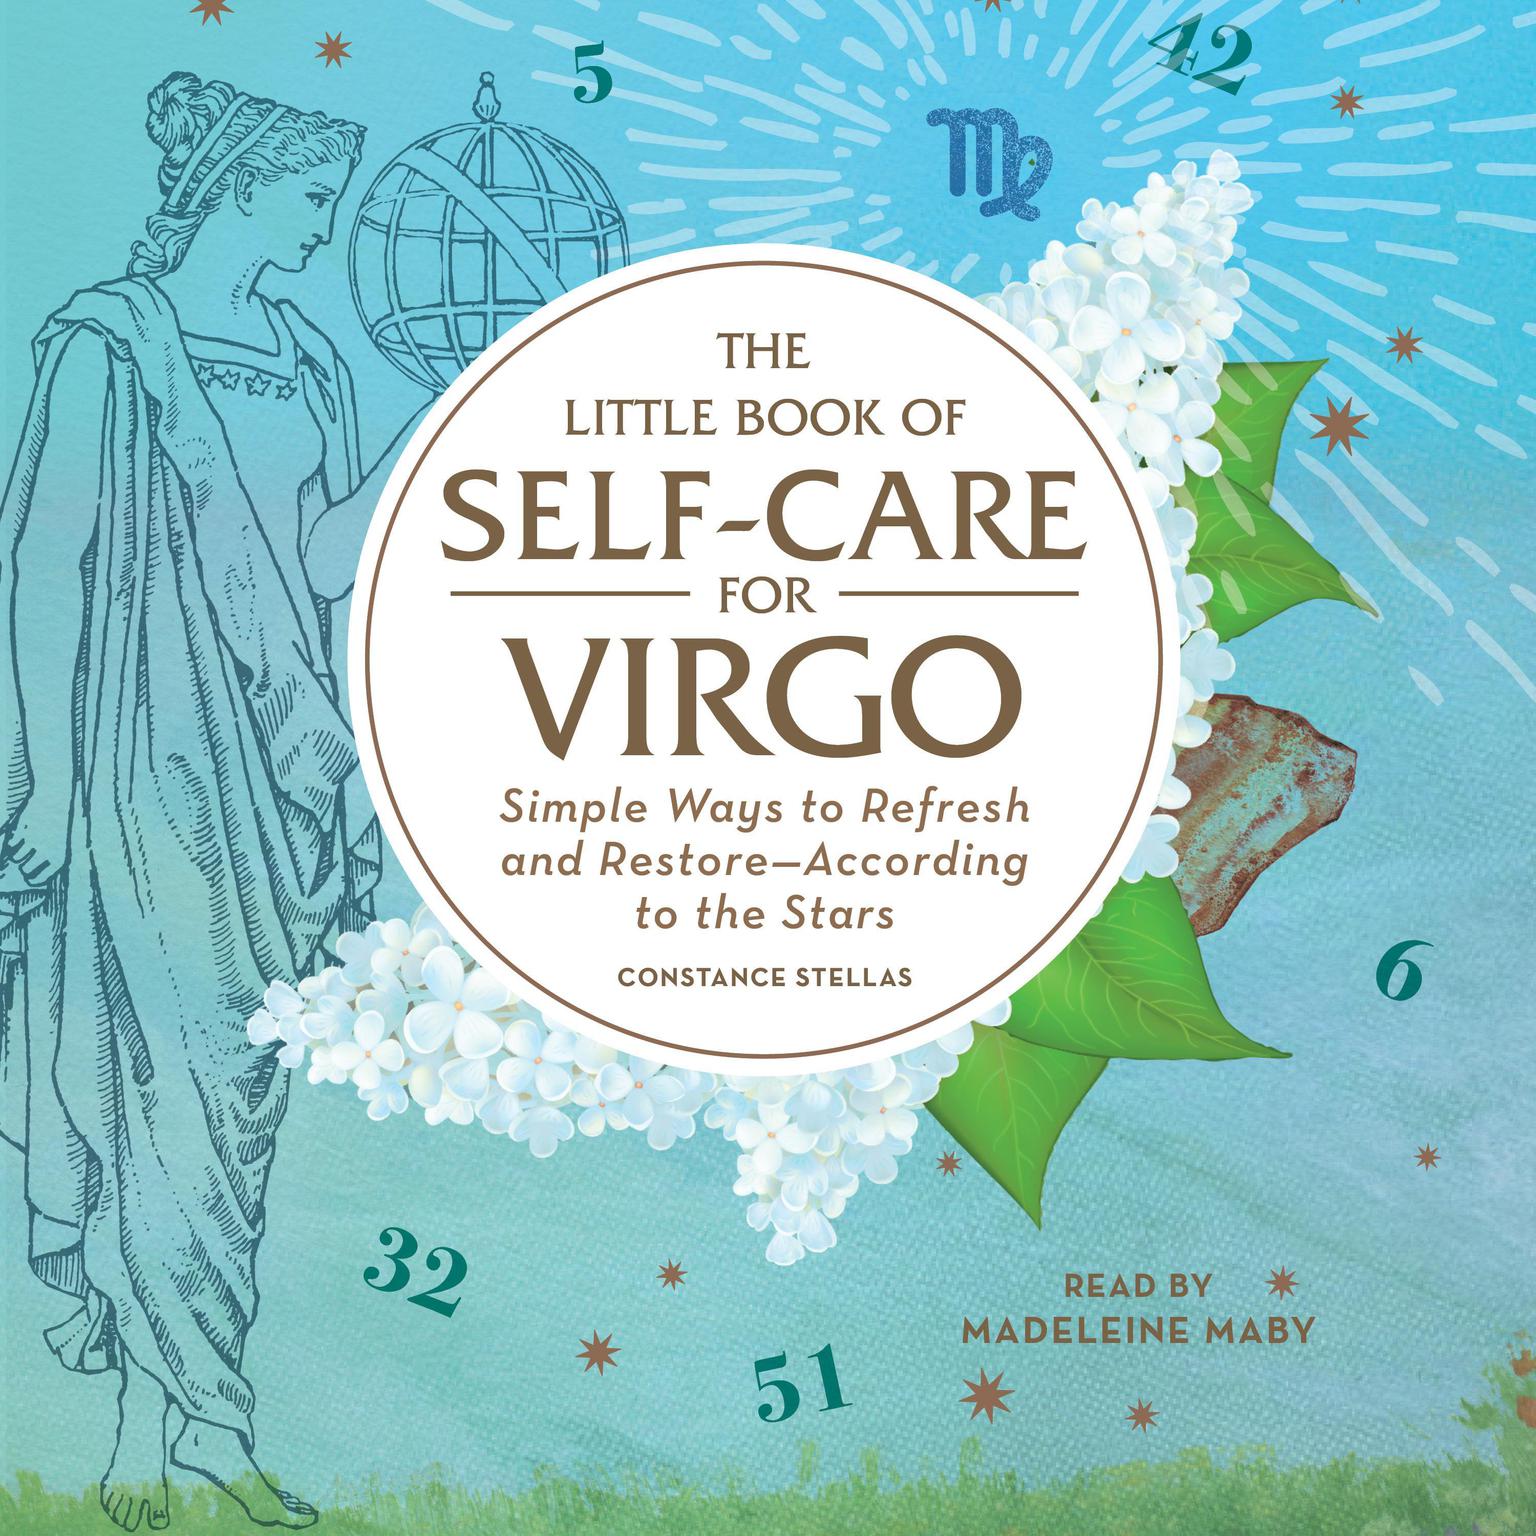 The Little Book of Self-Care for Virgo: Simple Ways to Refresh and Restore—According to the Stars Audiobook, by Constance Stellas